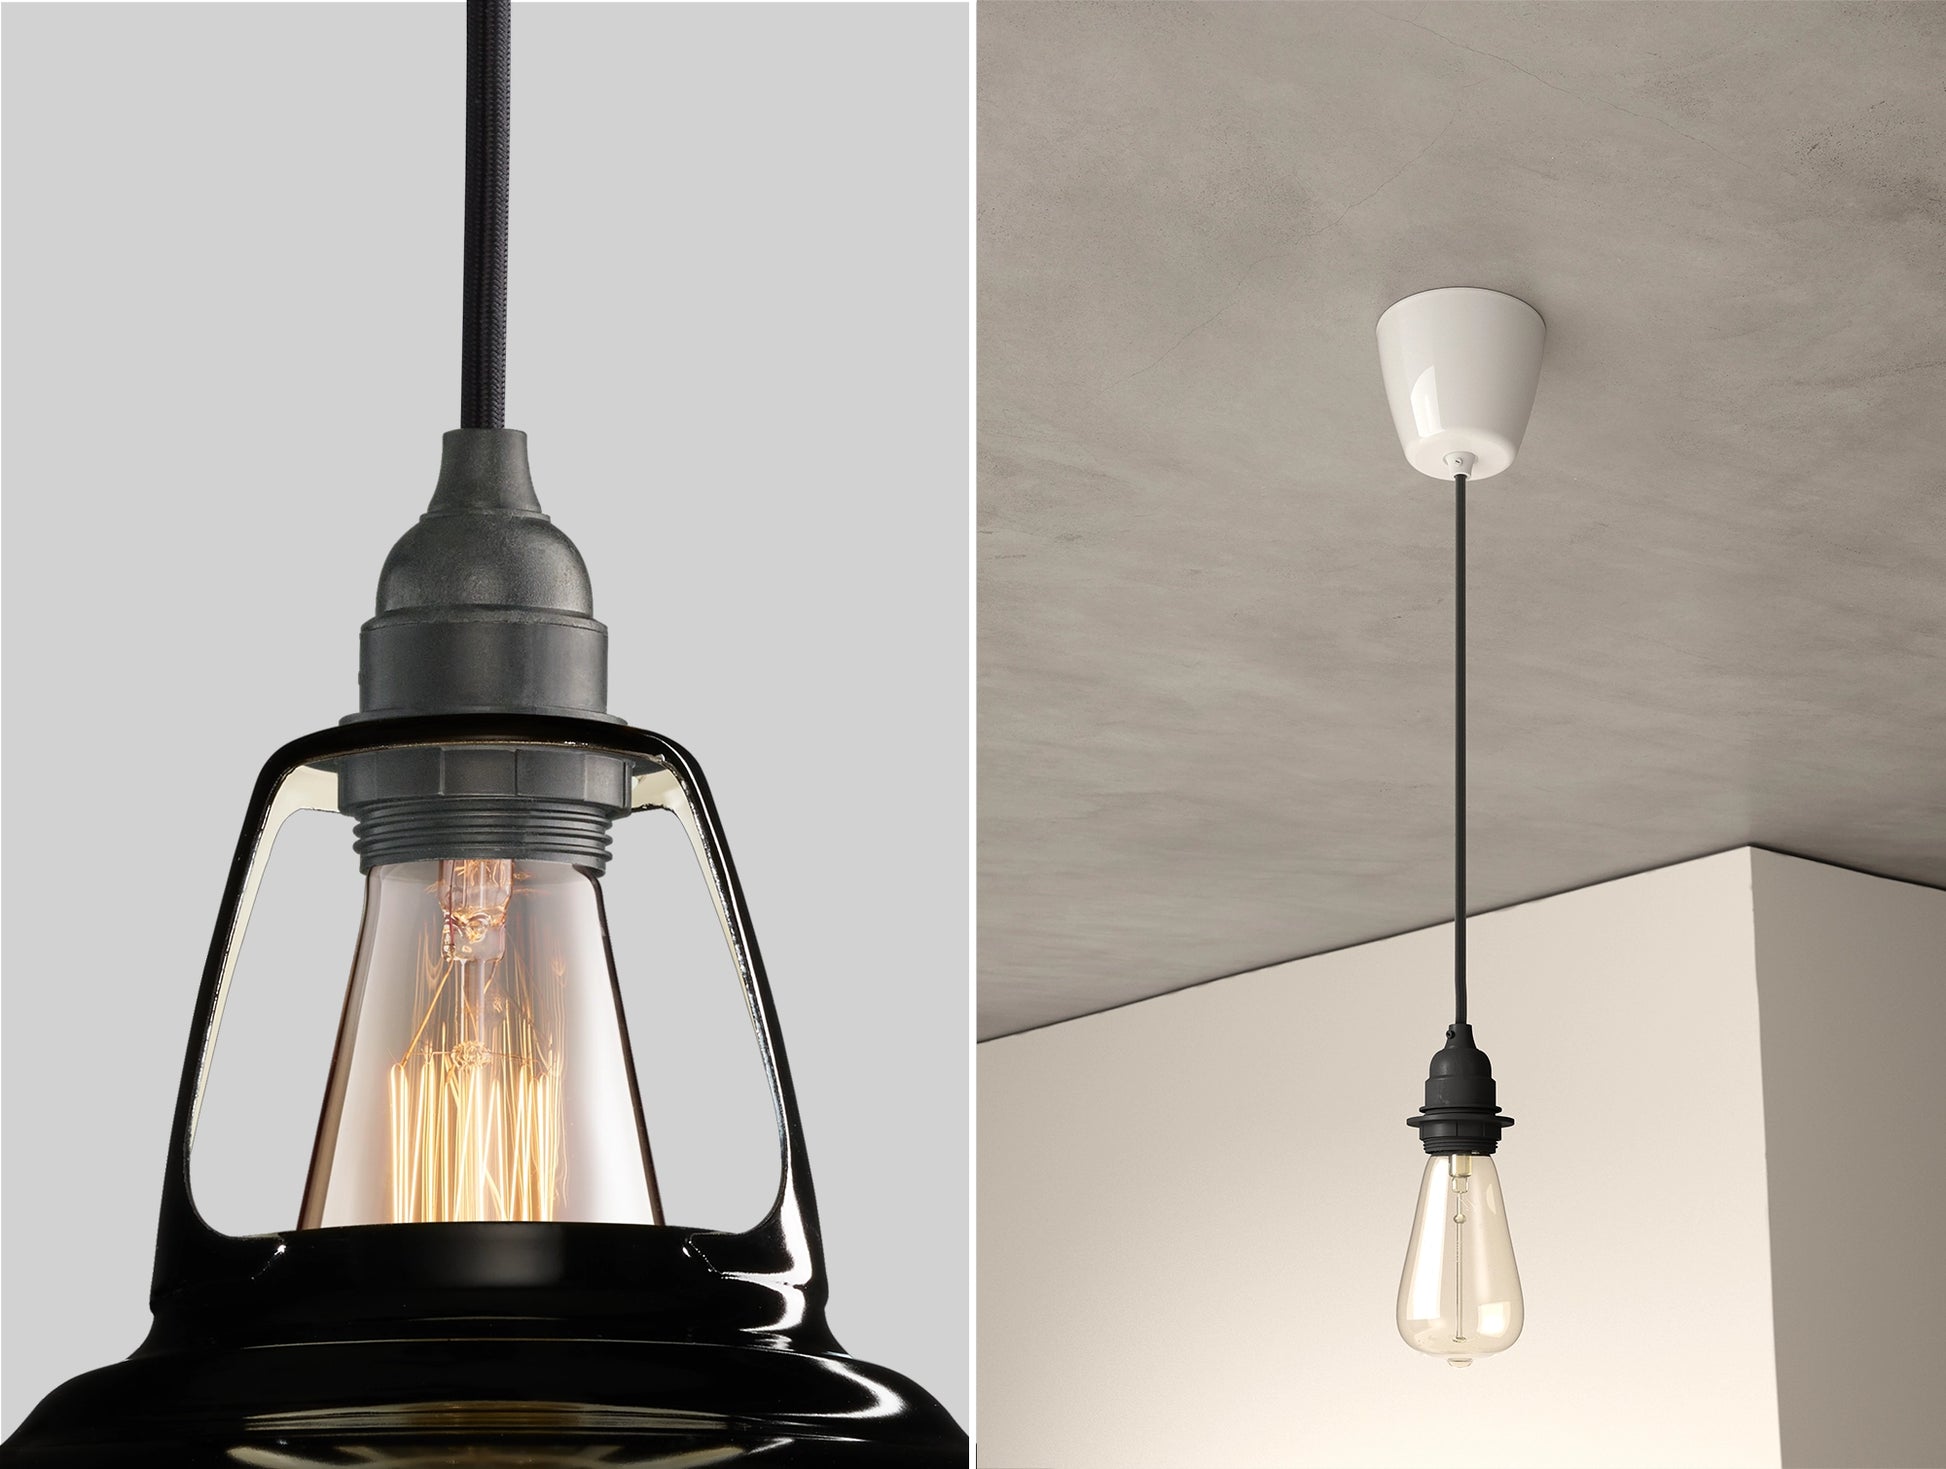 Close up of an E27 Industrial suspension set on a Jet Black lampshade on the left. On the right, an E27 Industrial pendant set with a lightbulb is hanging from the ceiling